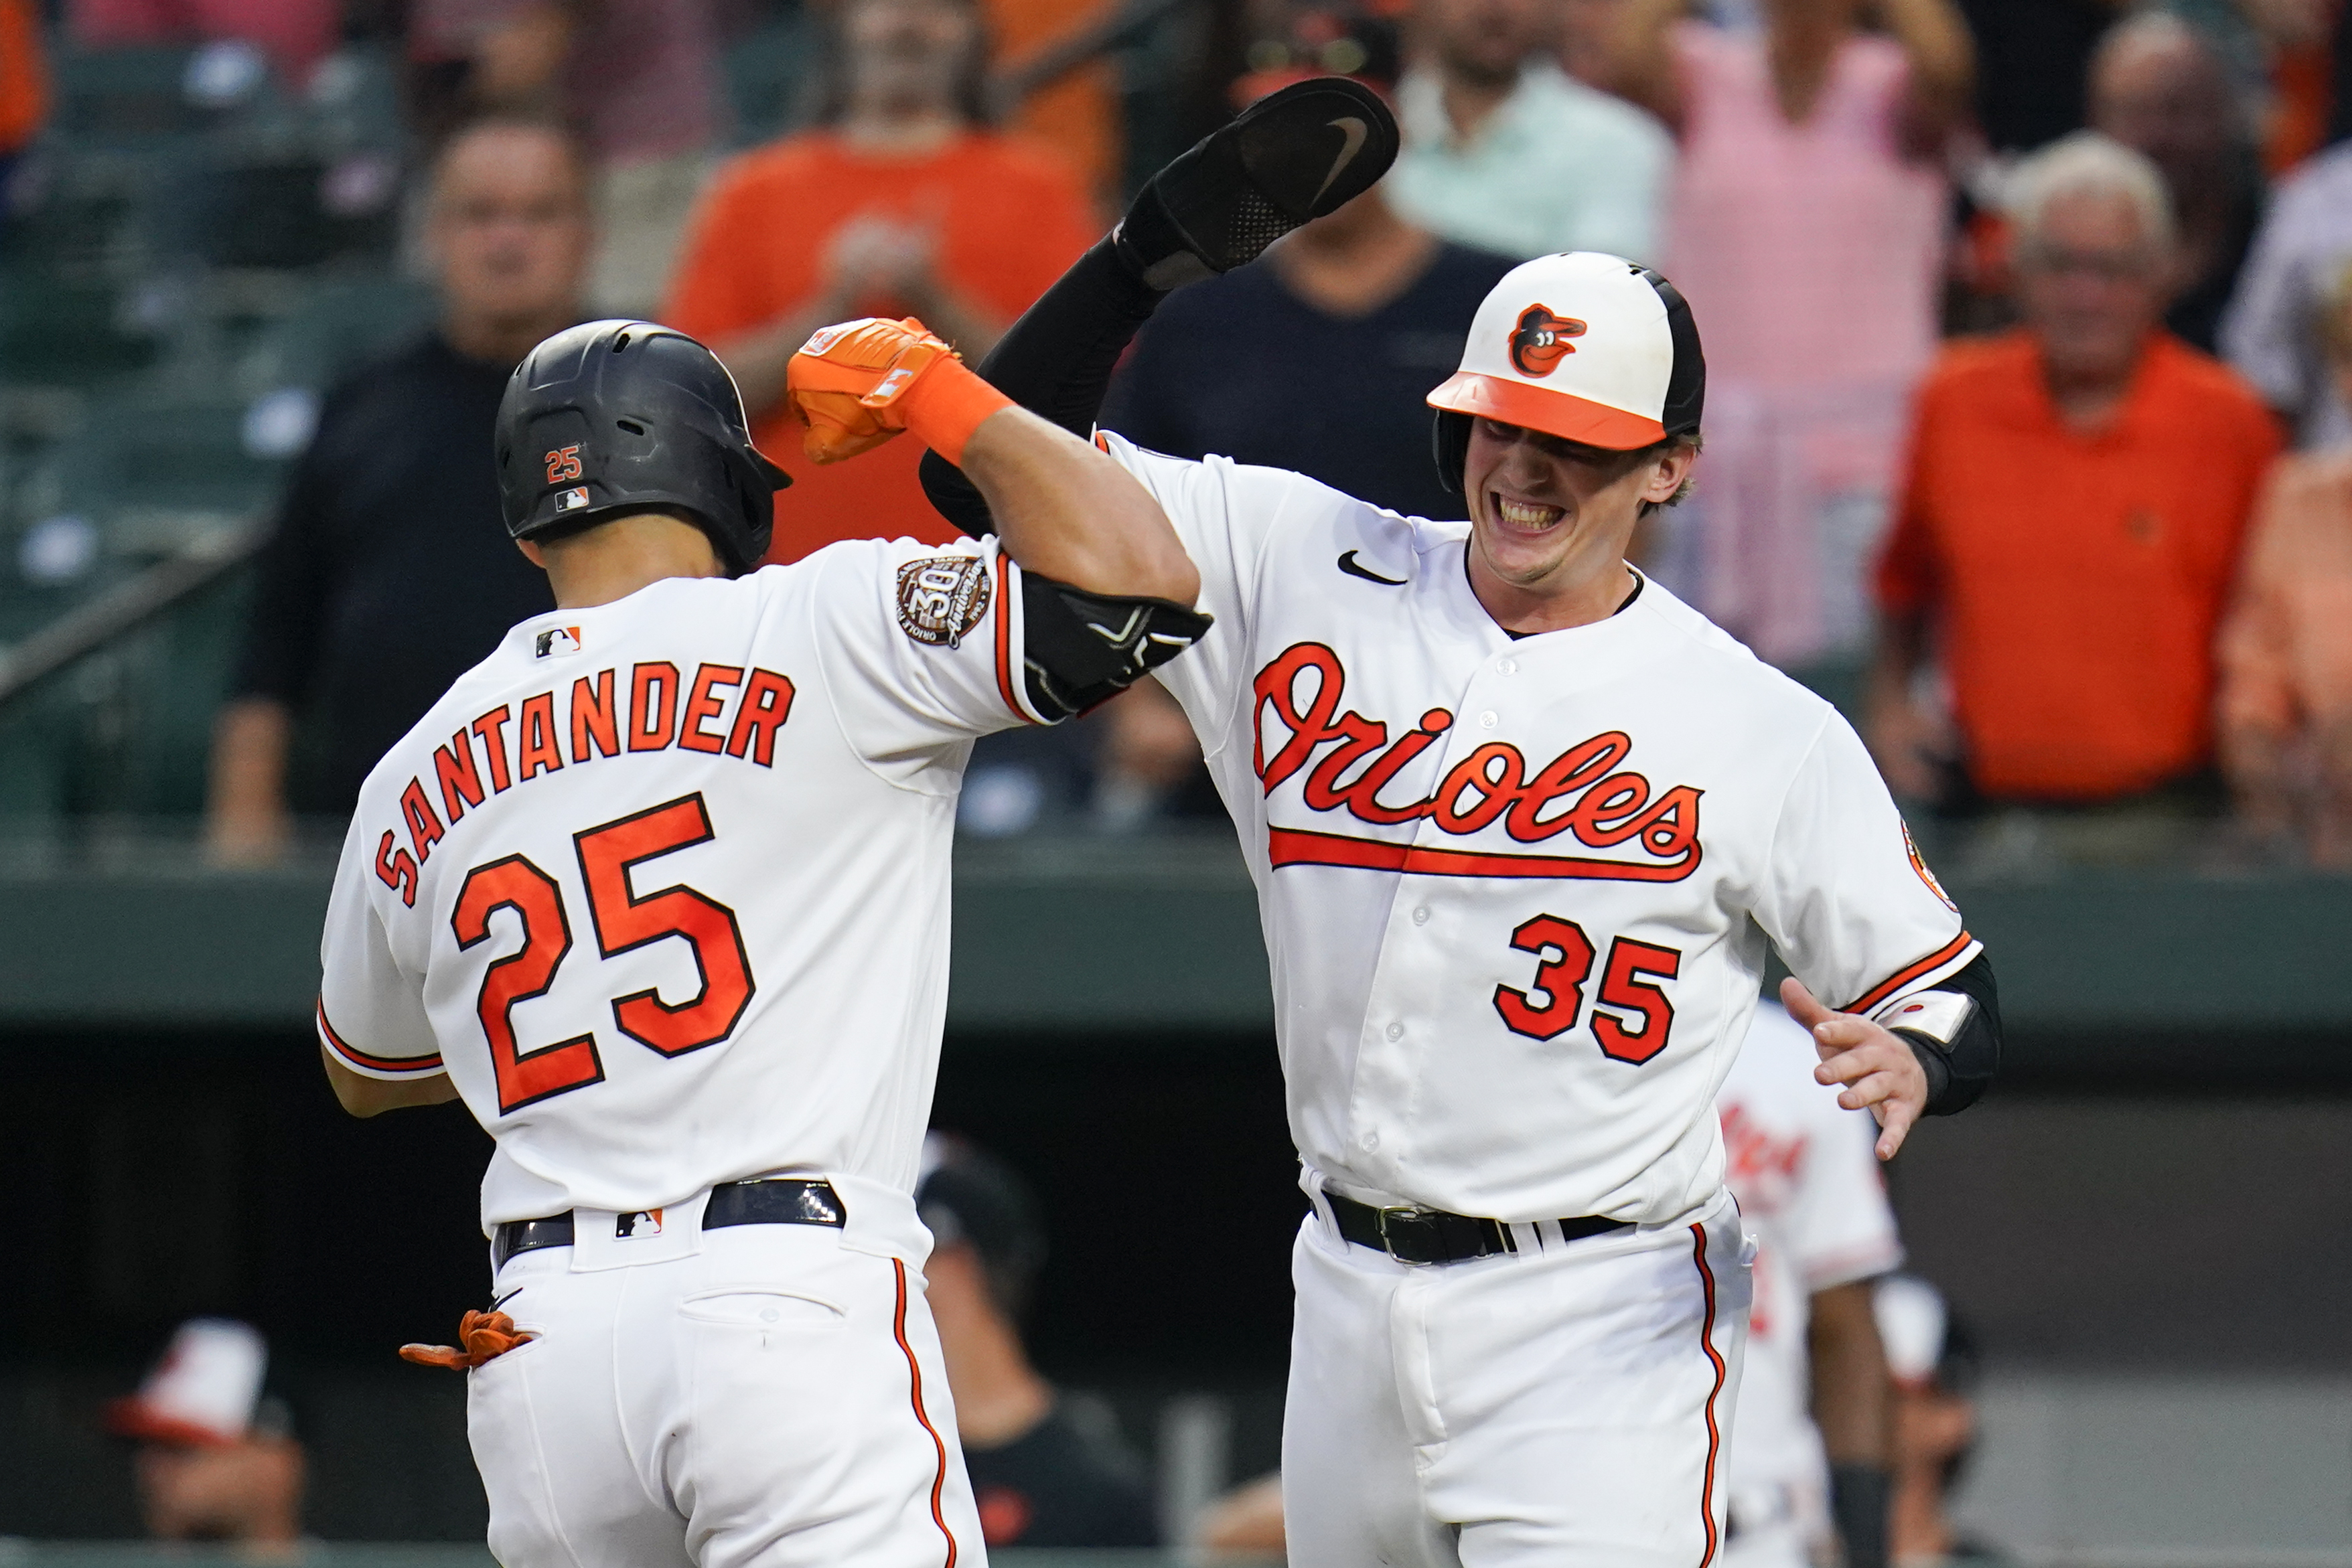 Orioles' Adley Rutschman named MLBPA, Silver Slugger finalist, with Brooks  Robinson, Anthony Santander also recognized